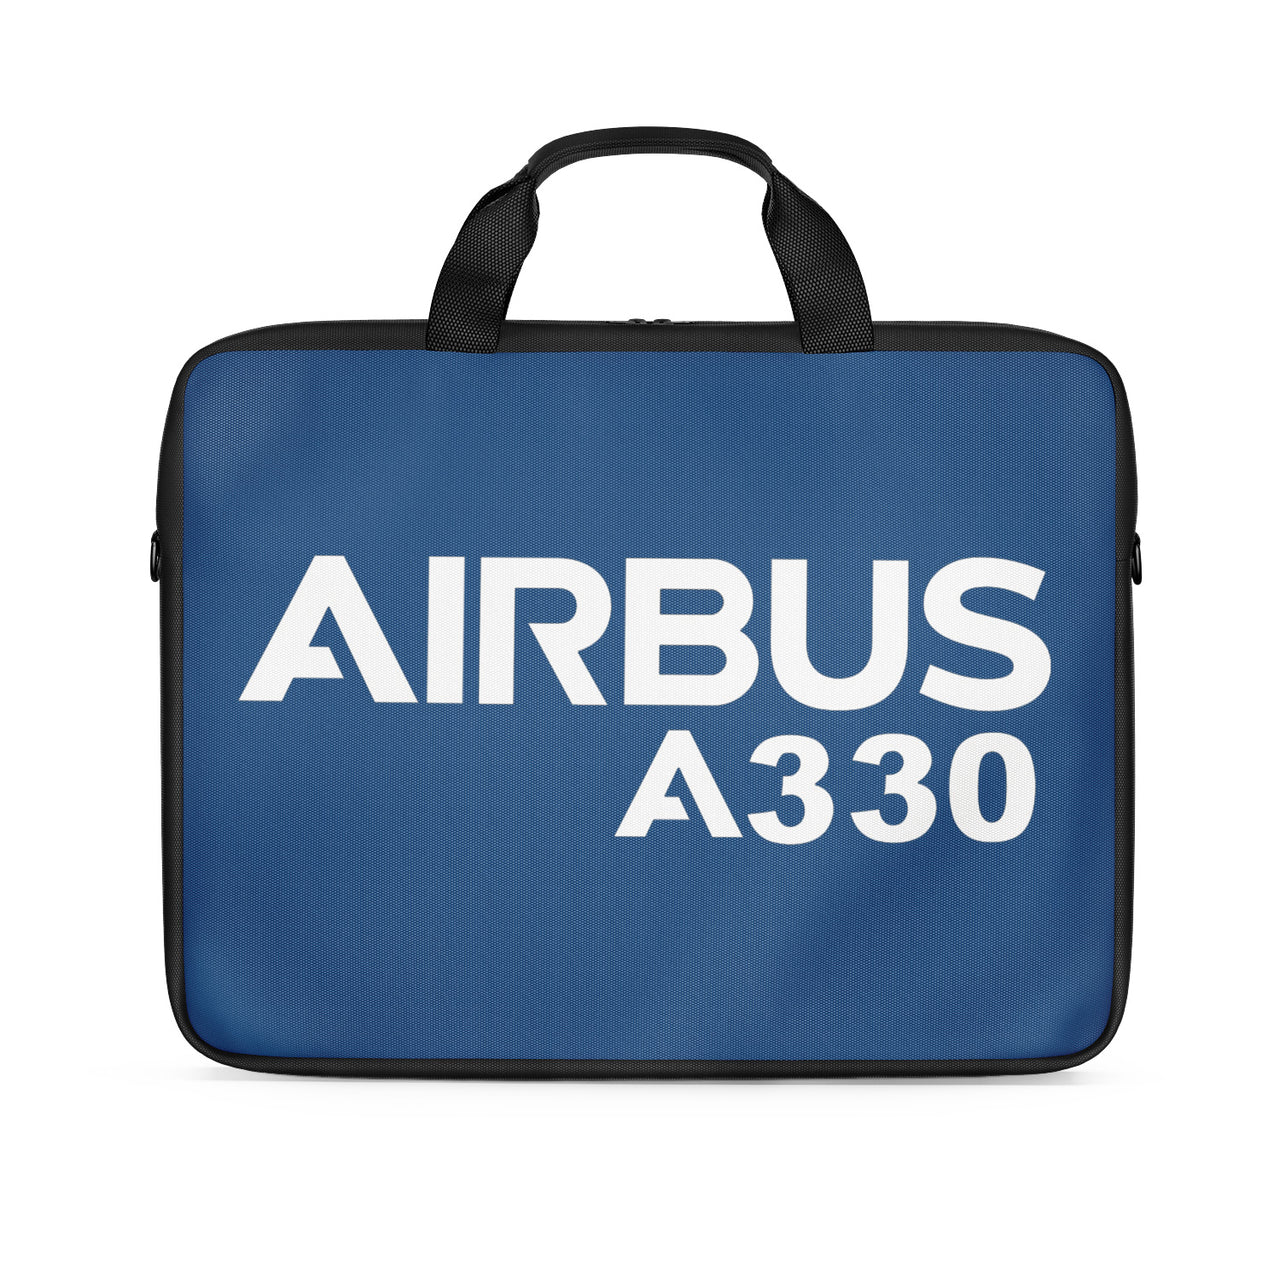 Airbus A330 & Text Designed Laptop & Tablet Bags